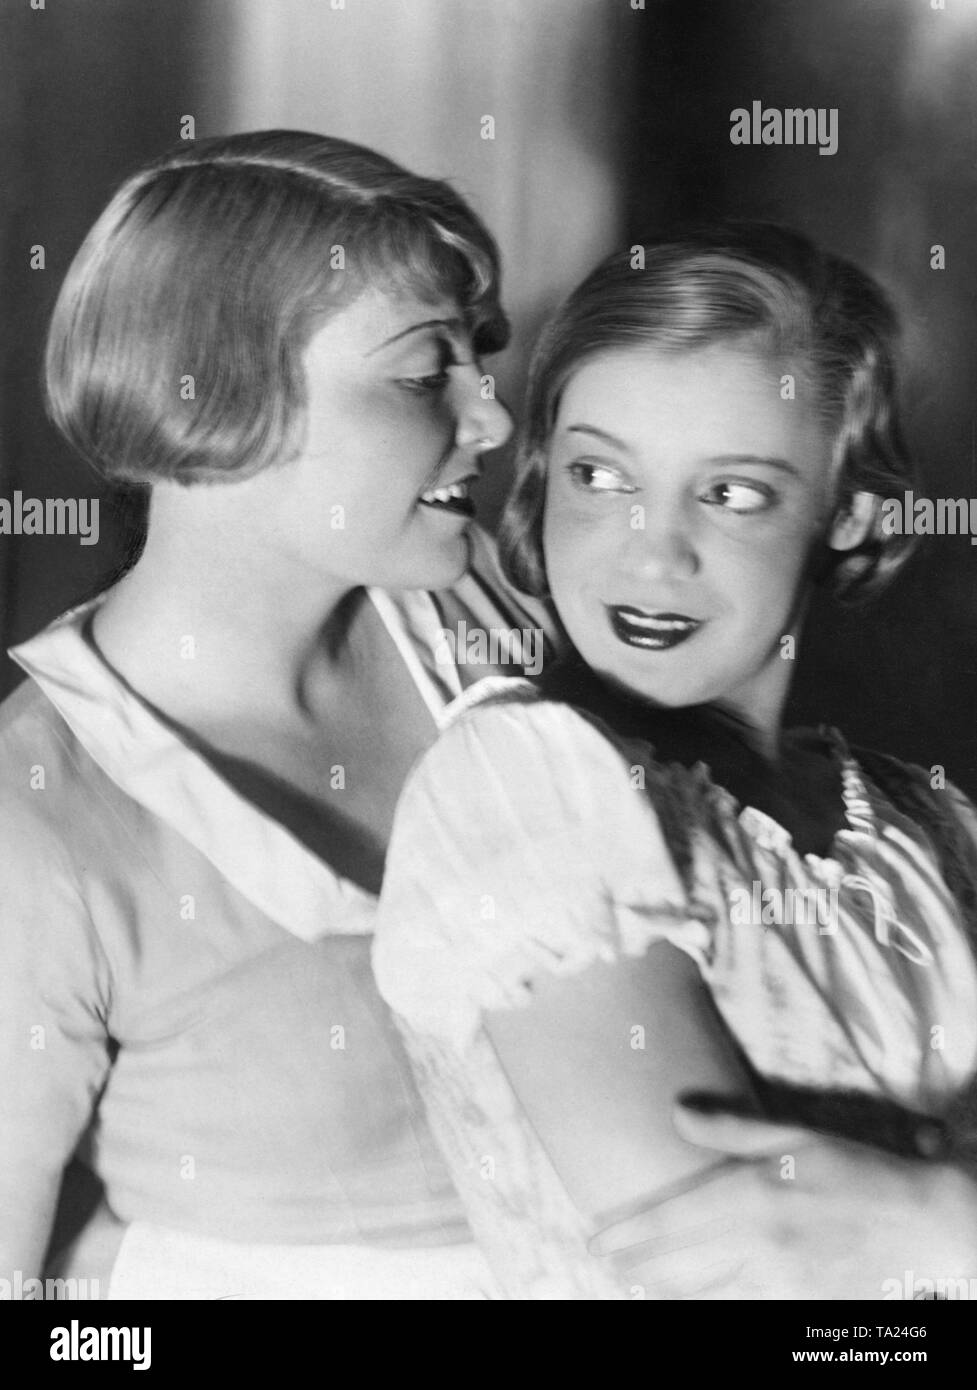 Young women with the trend hairstyle of the 1920s, the bob. Undated photo. Stock Photo